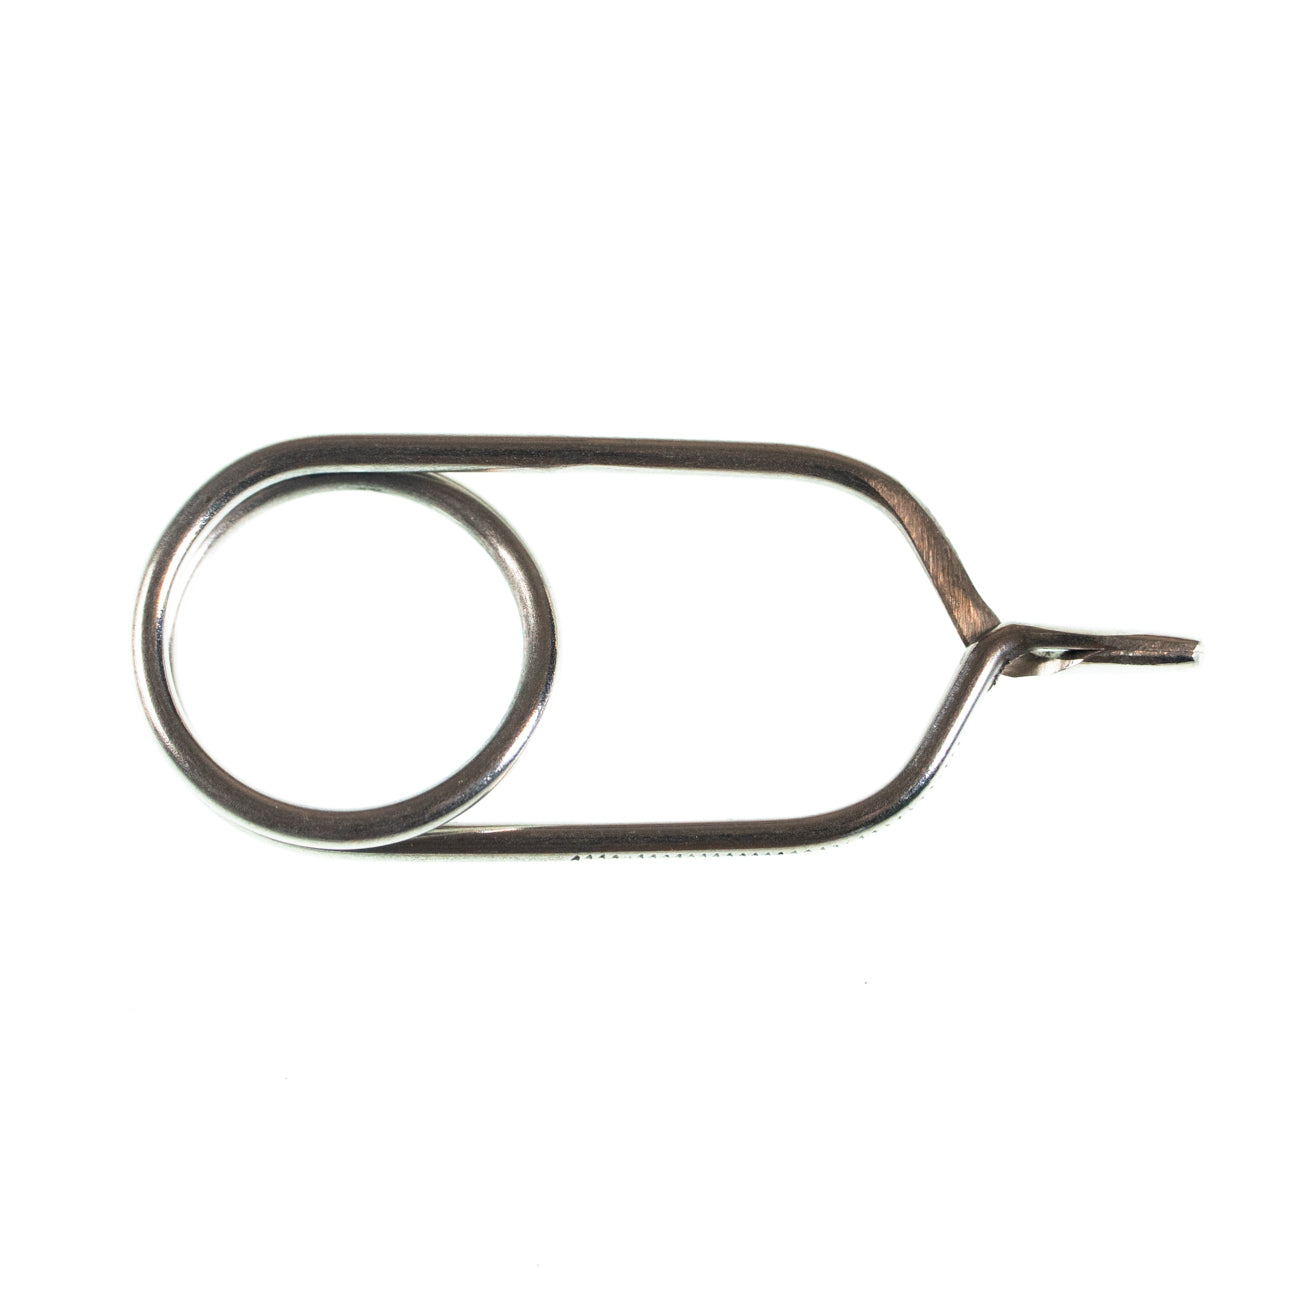 Large English Hackle Pliers